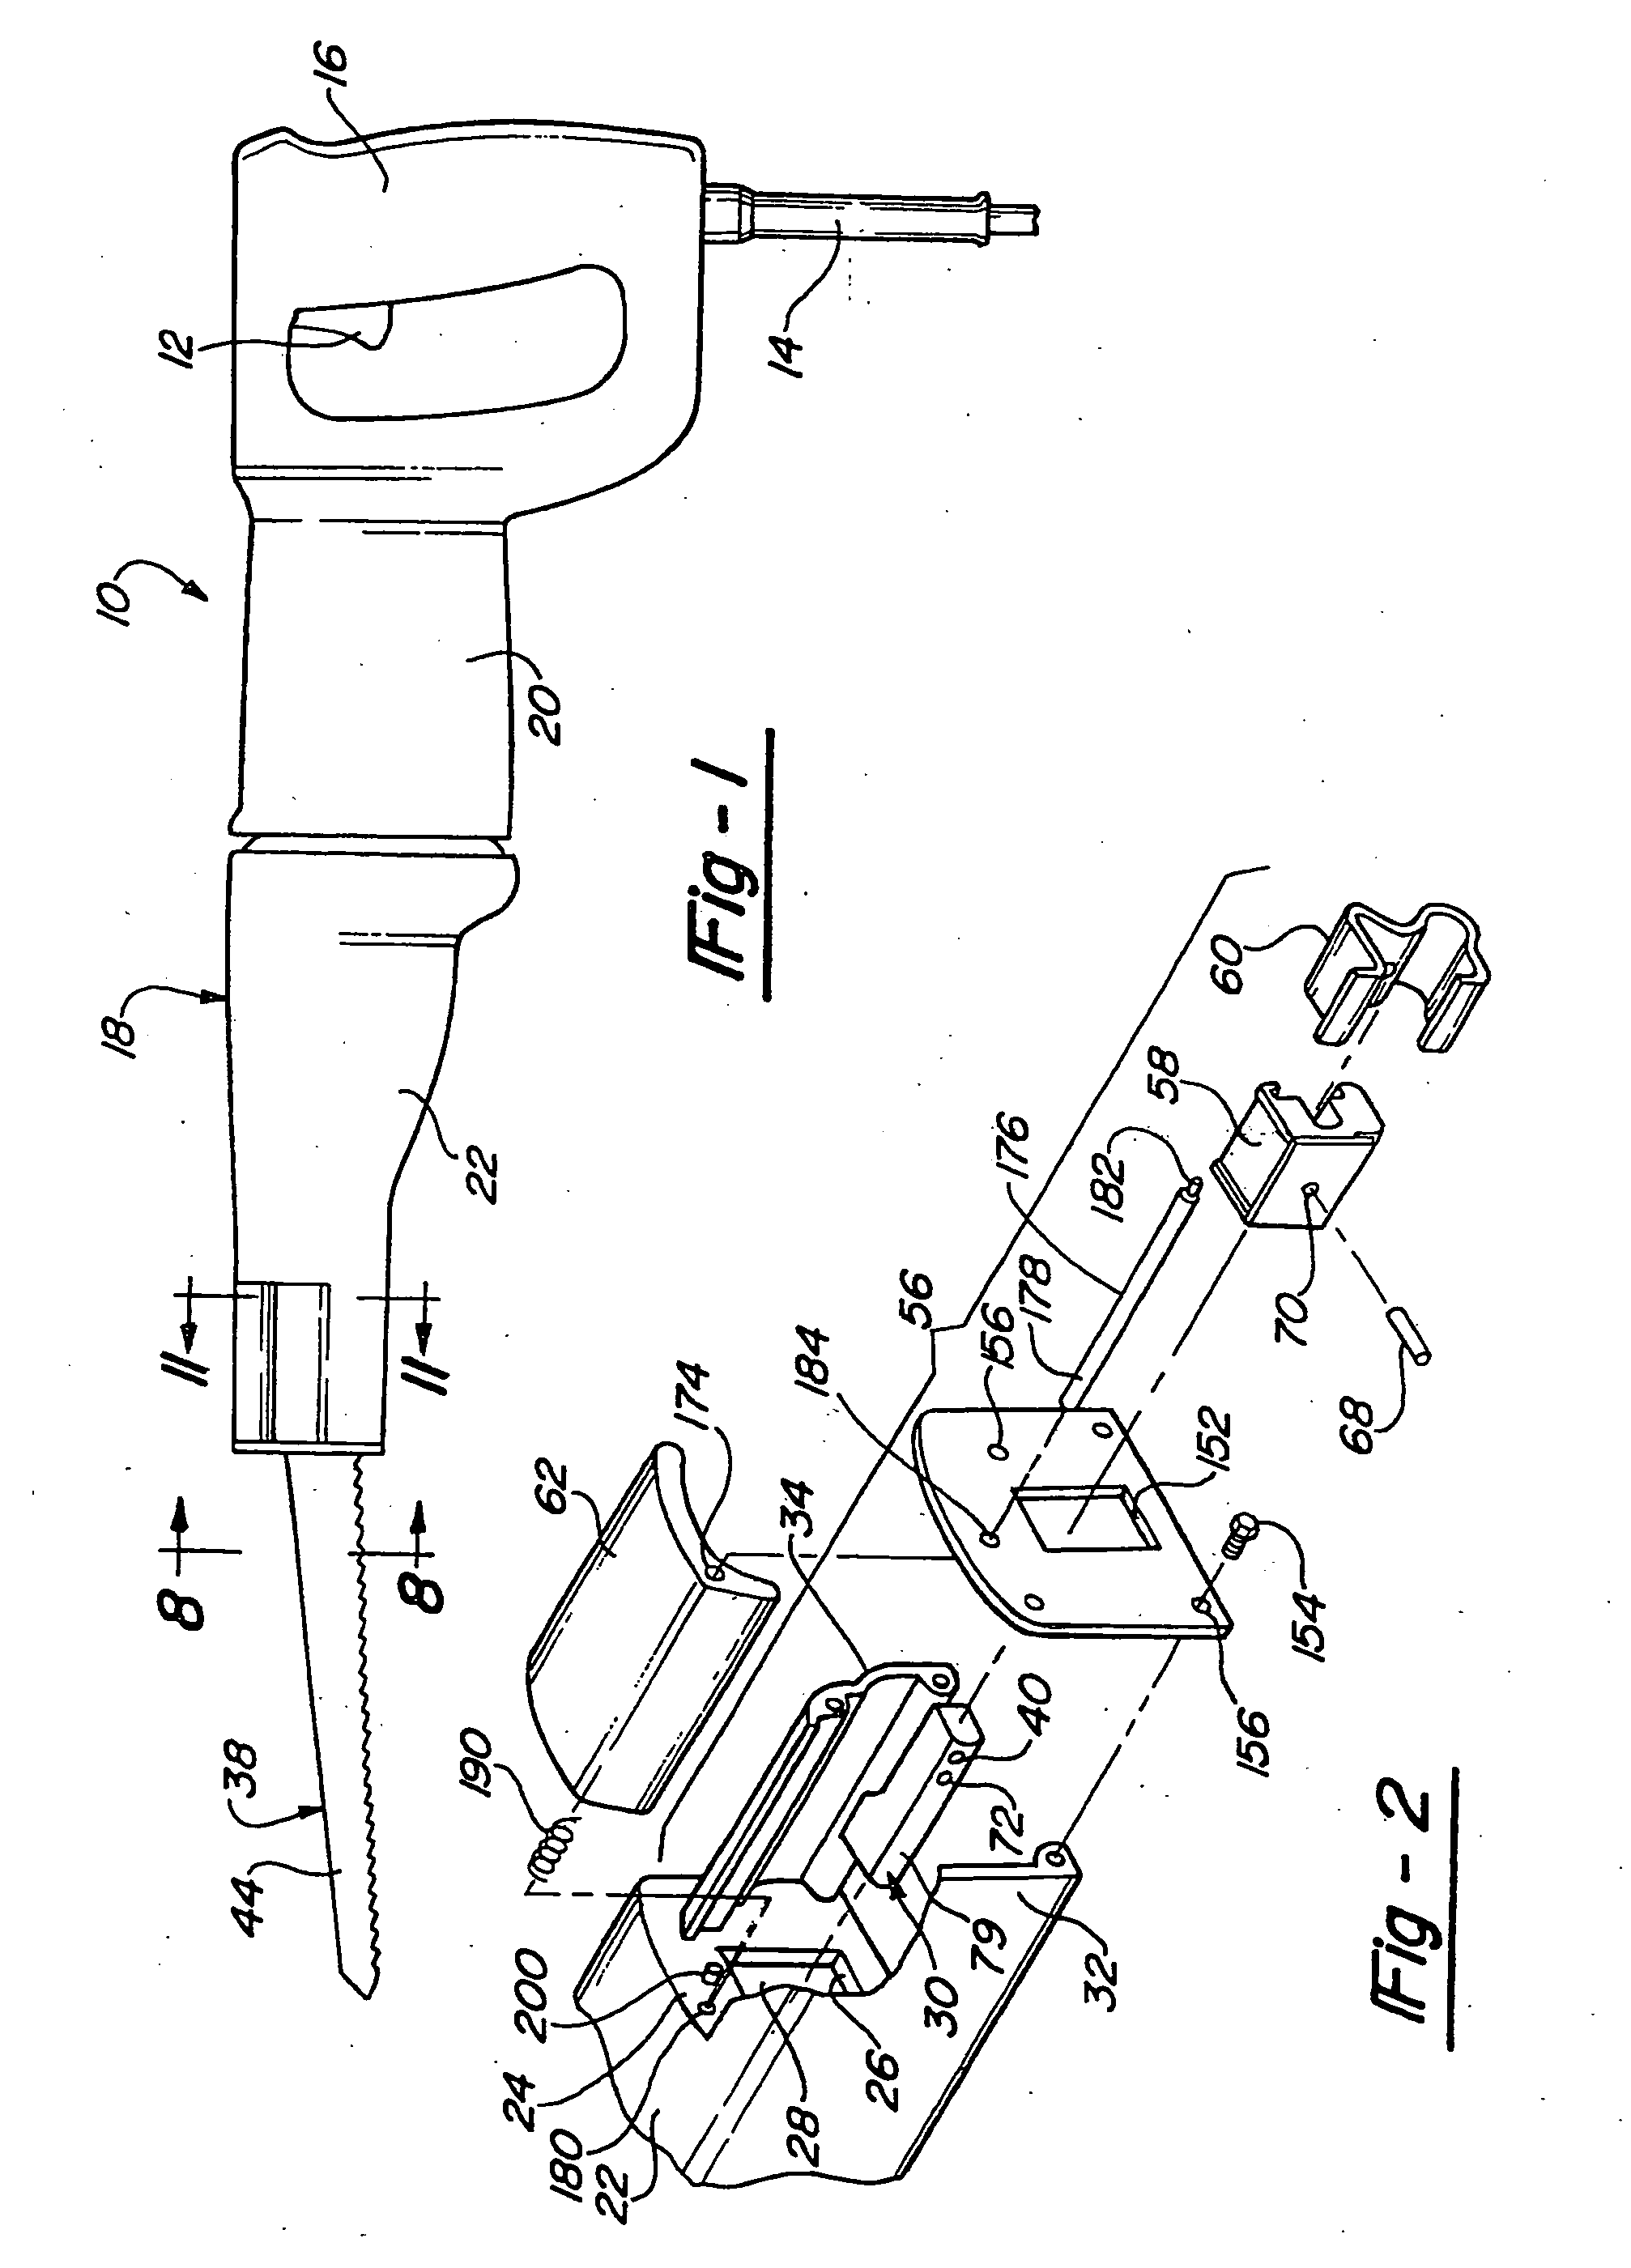 Clamping arrangement for receiving a saw blade in multiple orientations